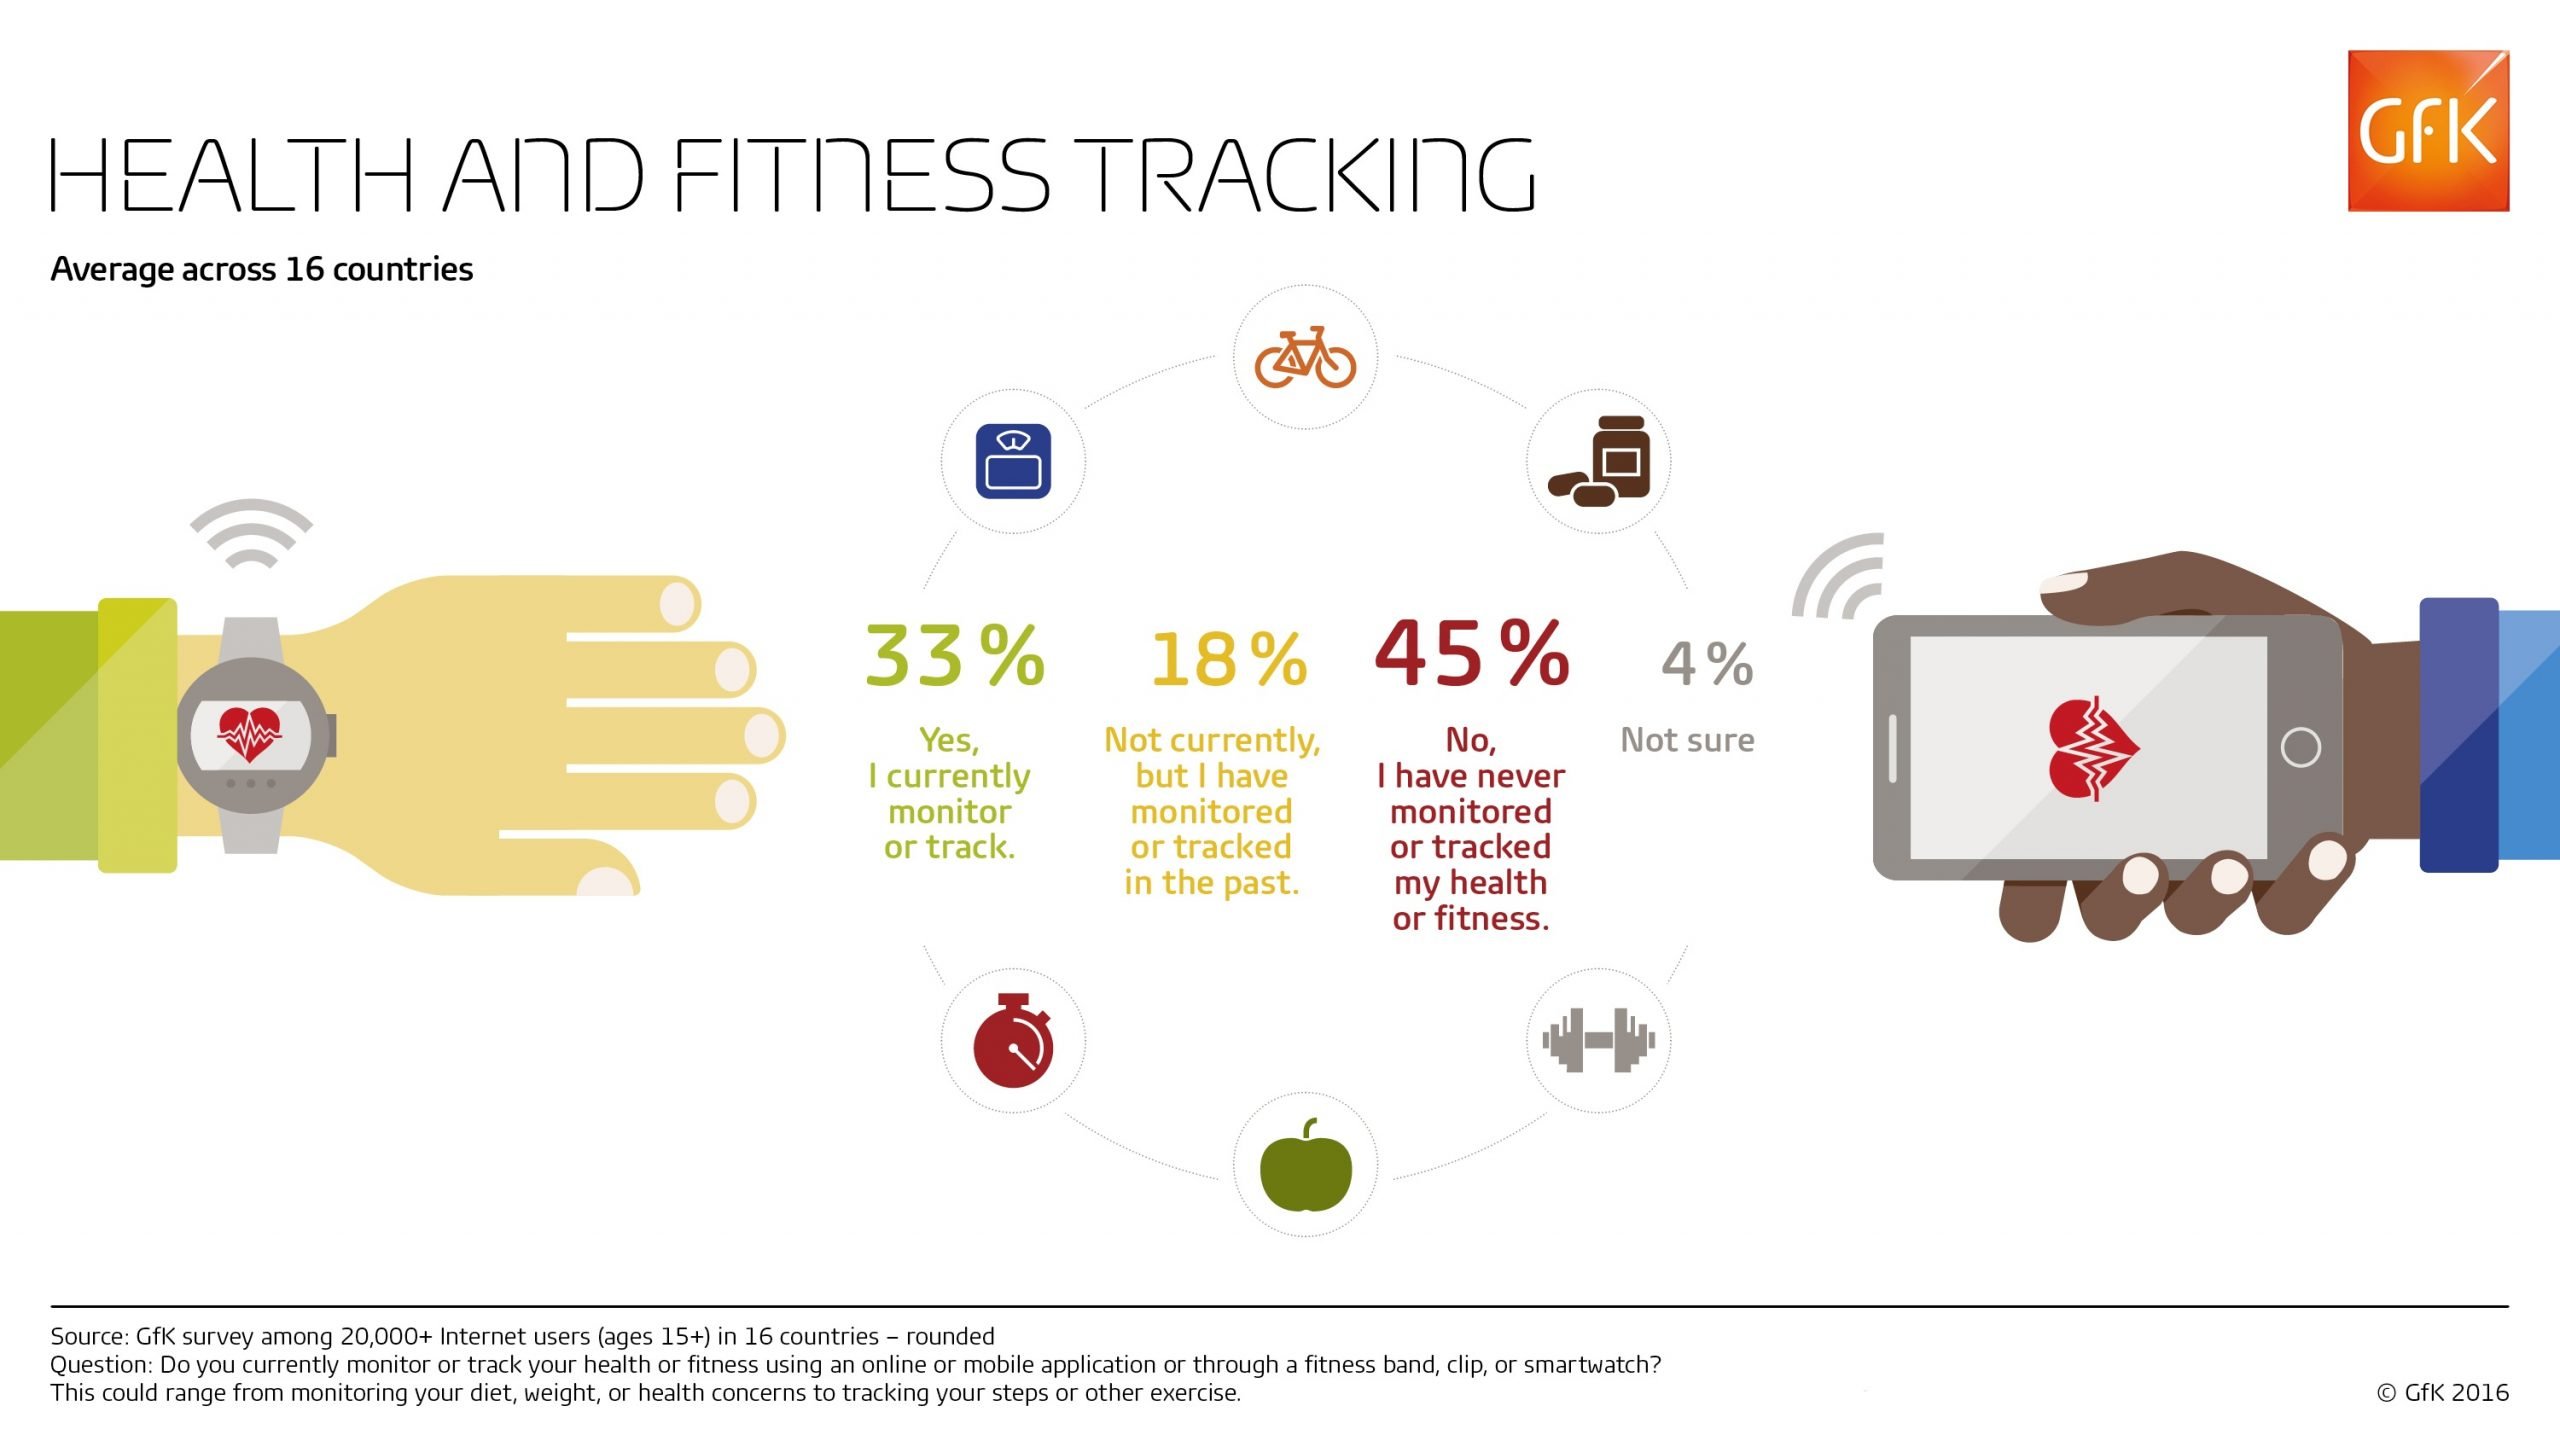 GFK Health & Fitness Tracking